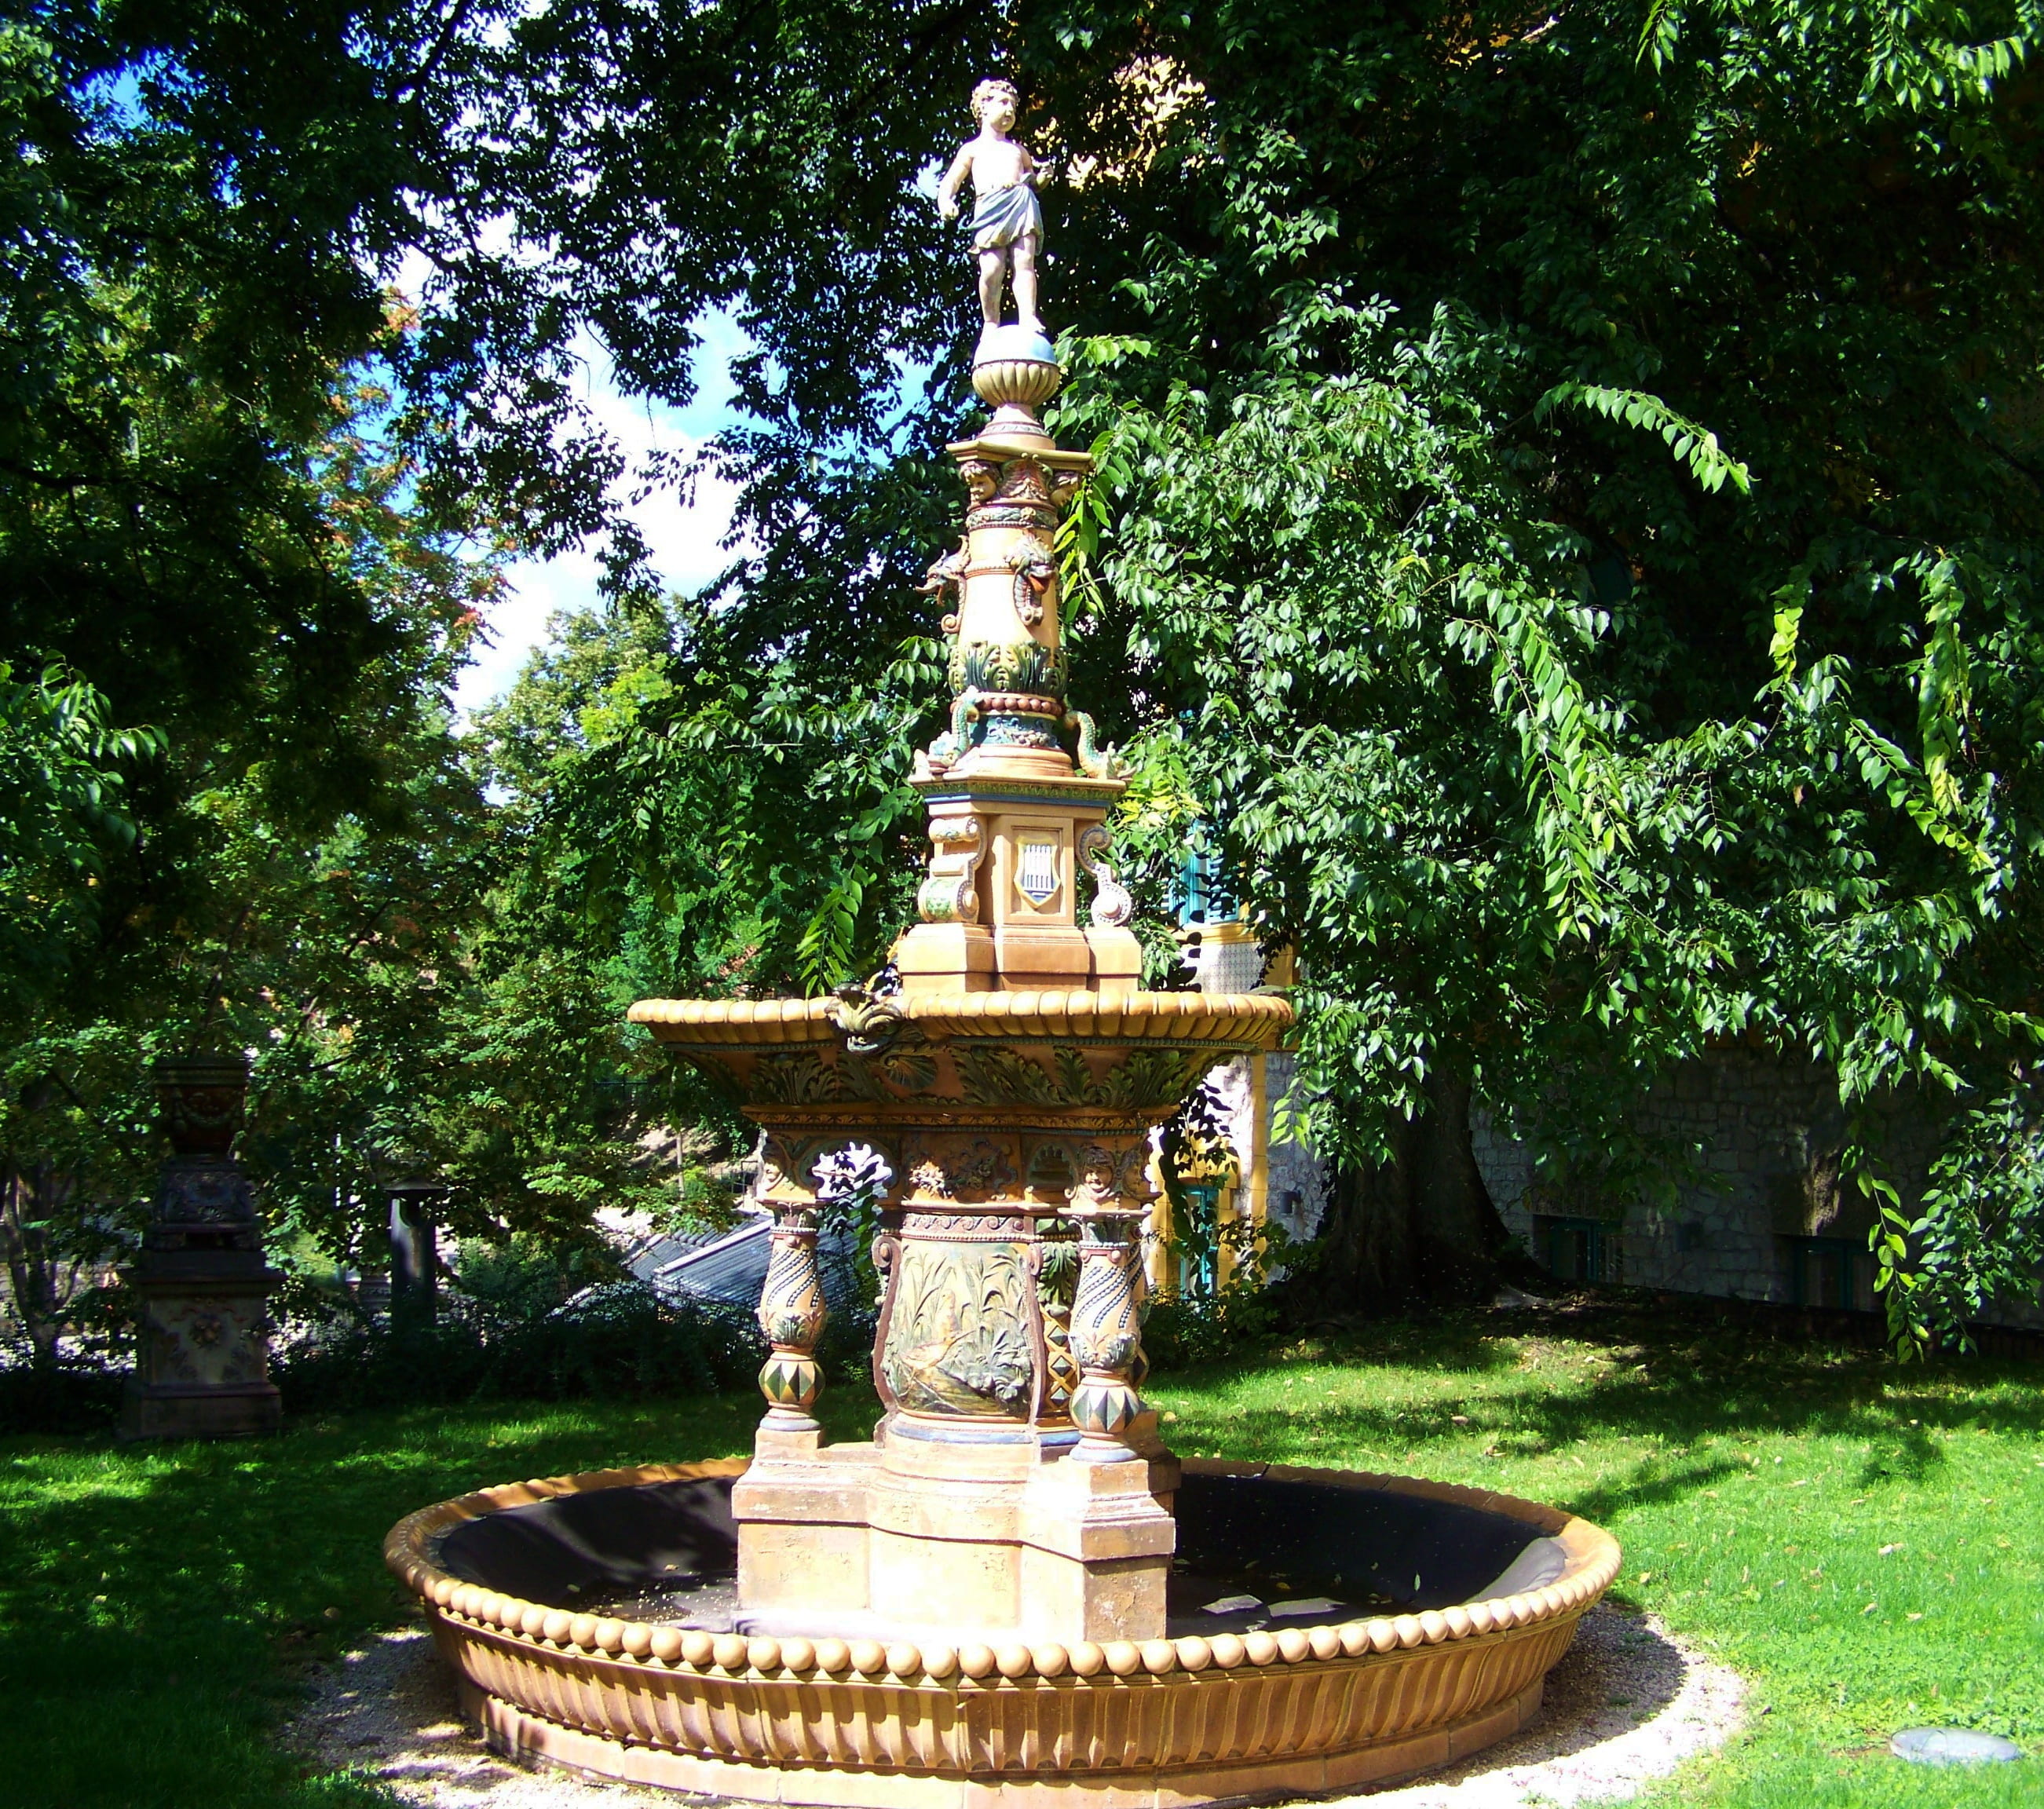 zsolnay fountain, zsolnay cultural quarter, pecs, plant, tree